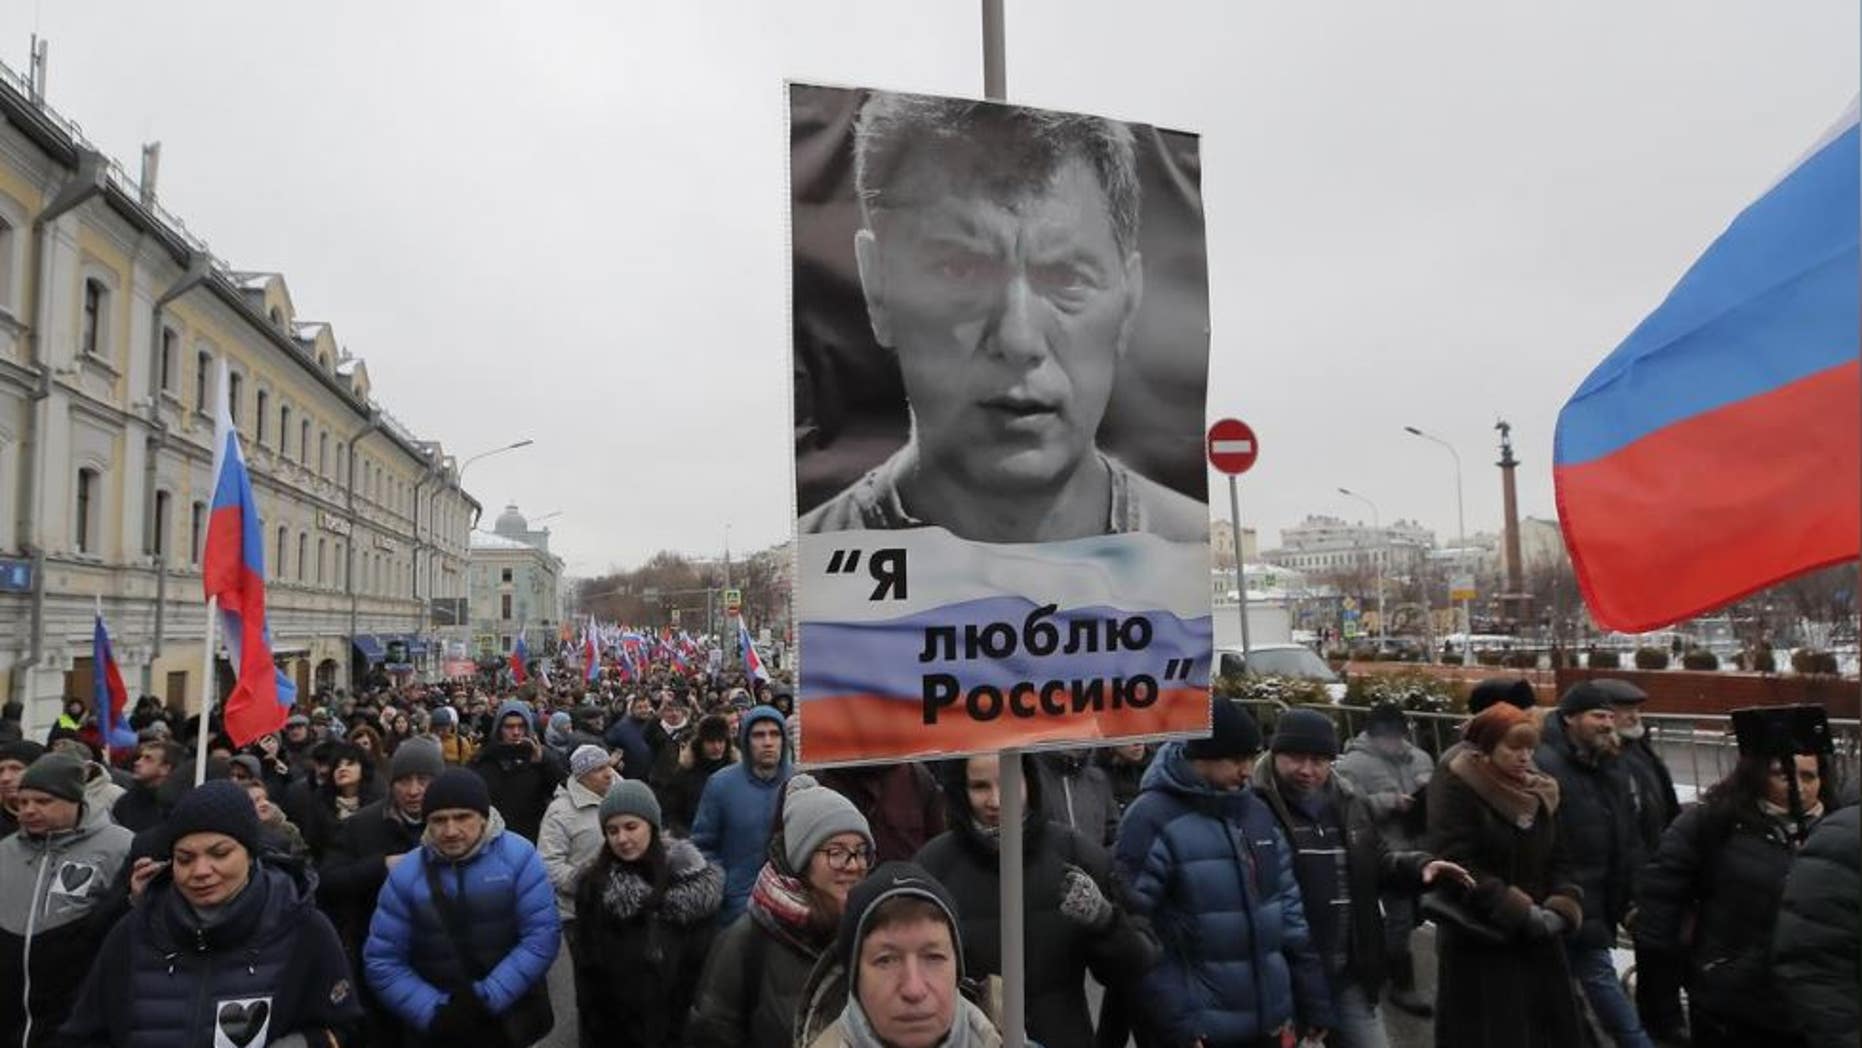 Thousands march in memory of slain Russian opposition leader Nemtsov Russia-protest-reuters